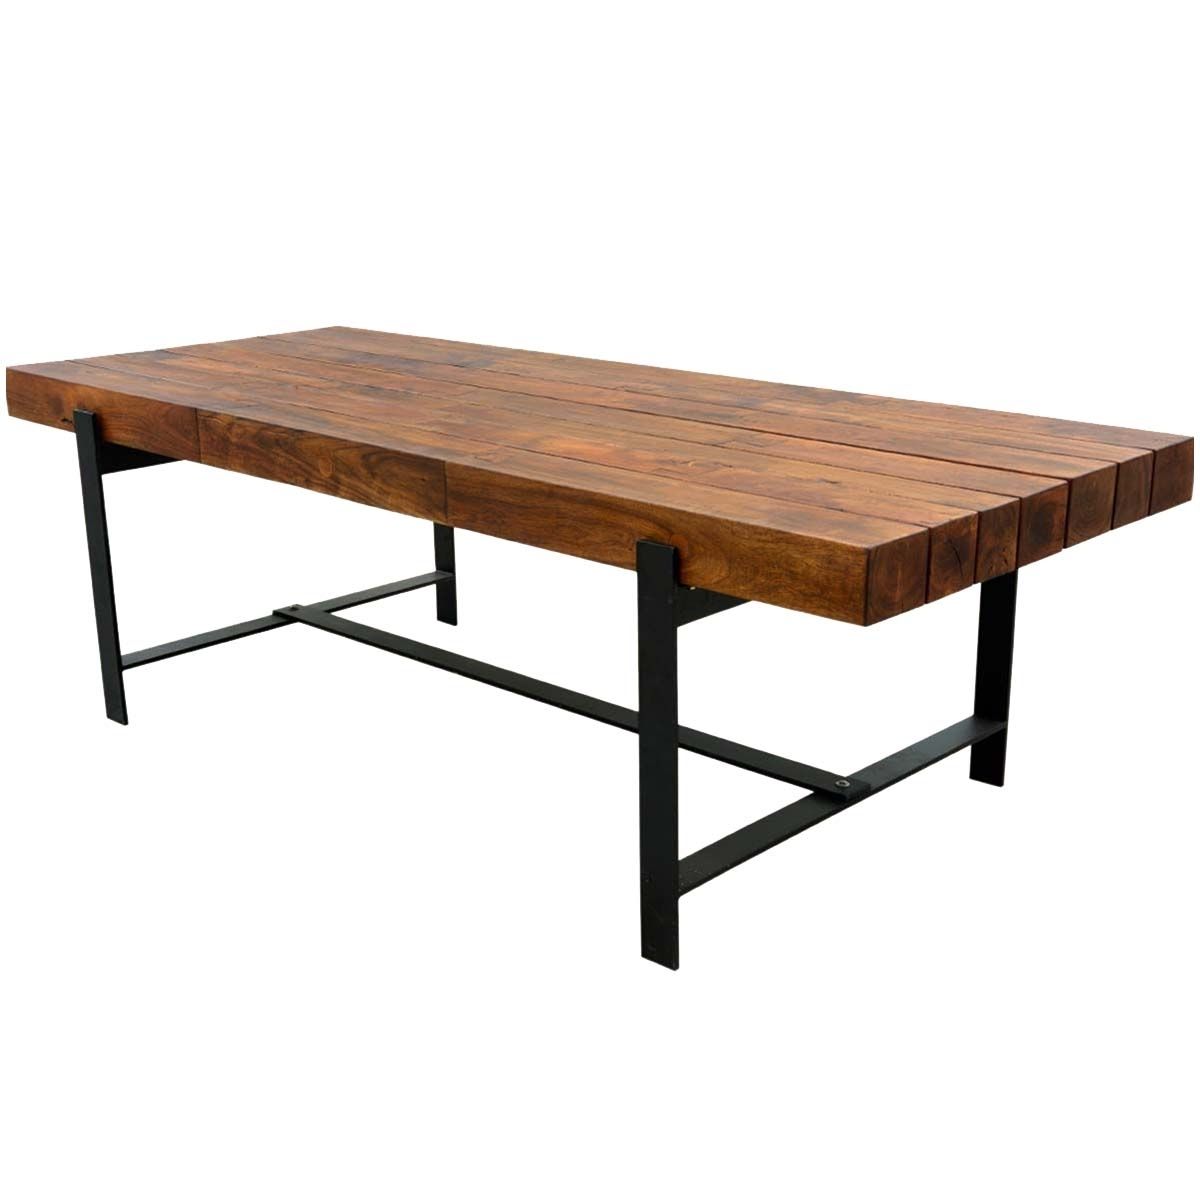 Popular Iron And Wood Dining Tables Regarding Industrial Iron & Acacia Wood 94" Large Rustic Dining Table (View 9 of 25)